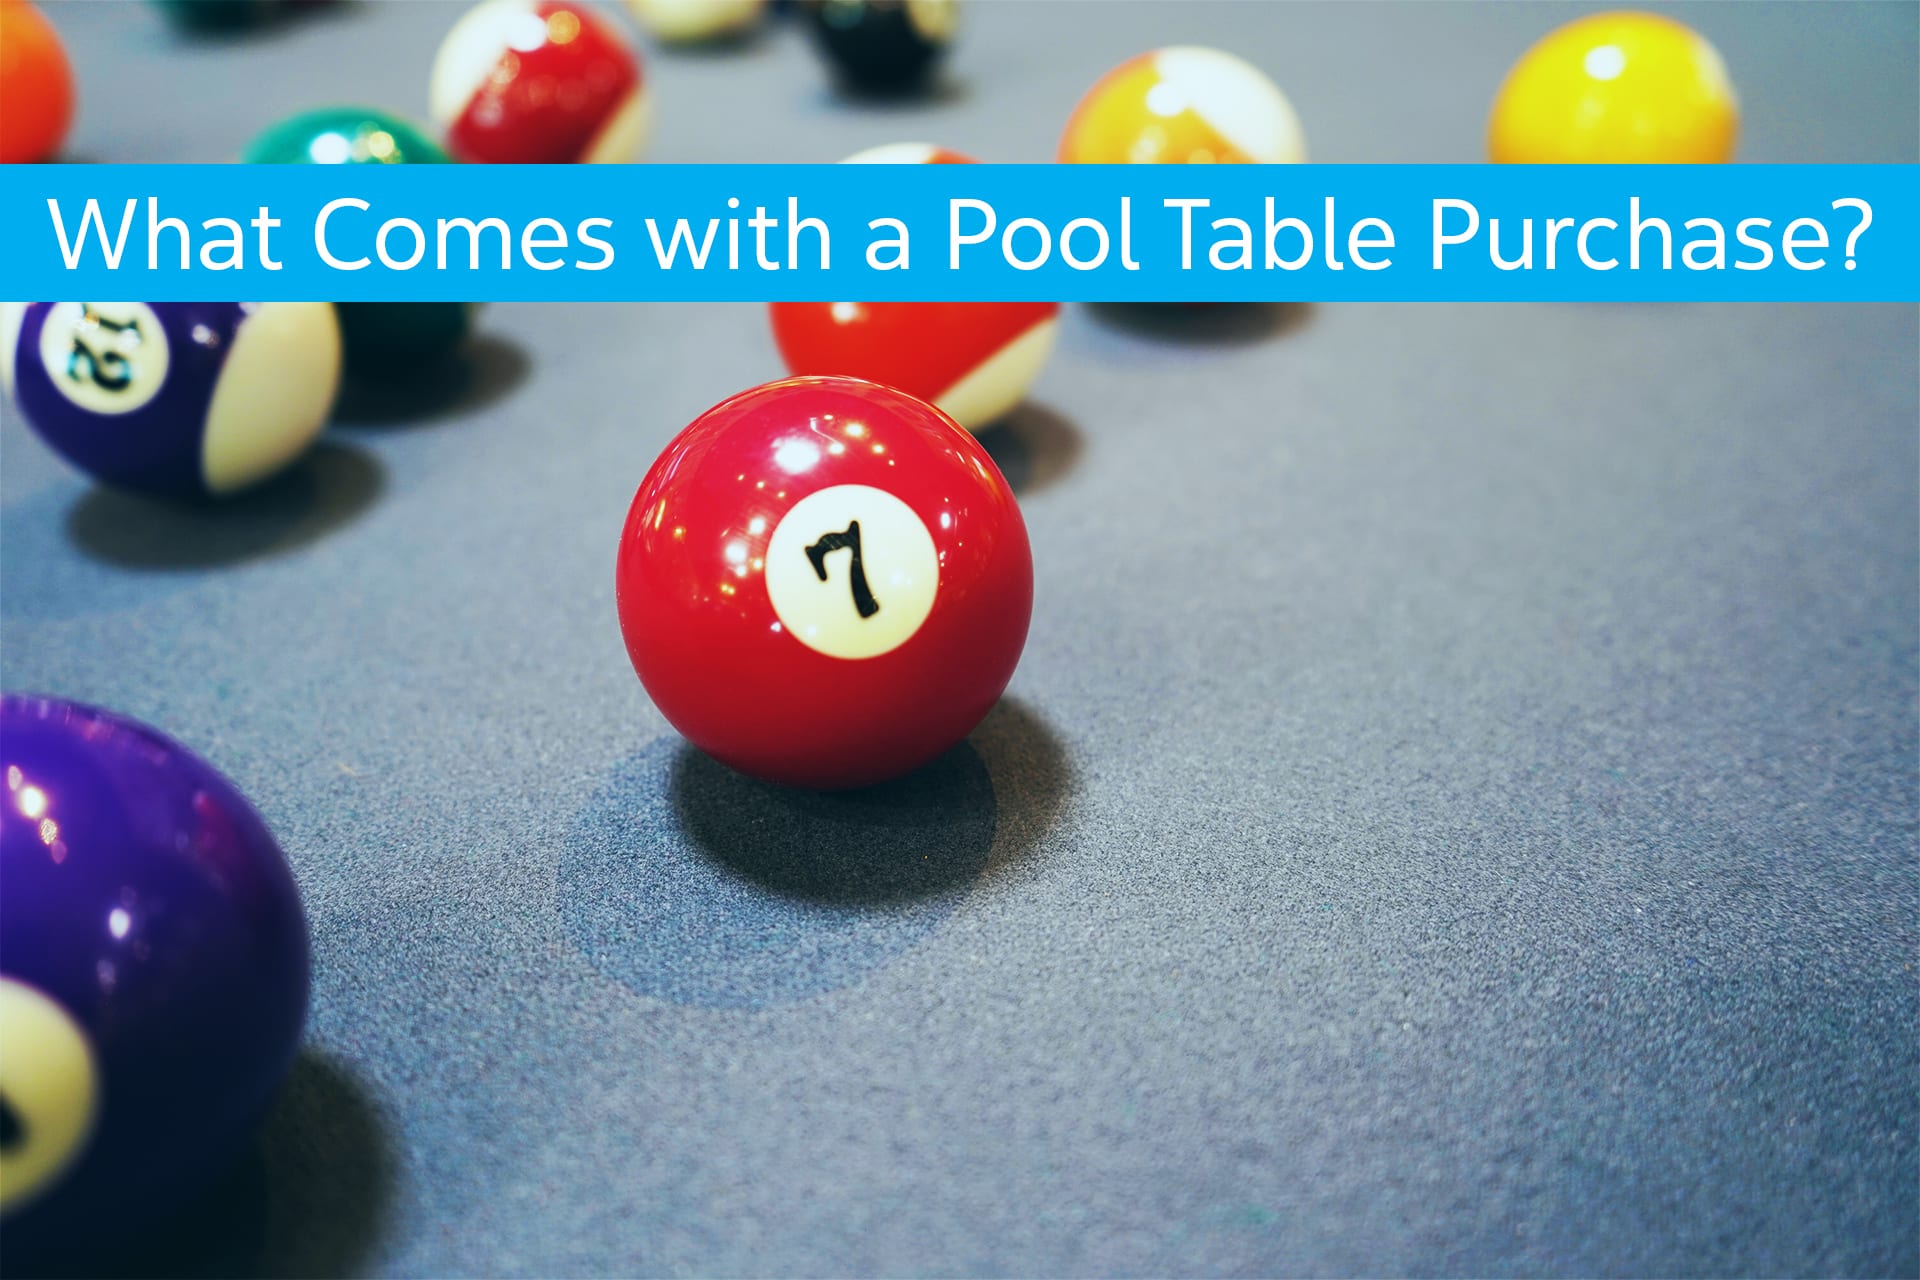 What Comes with a Pool Table Purchase?